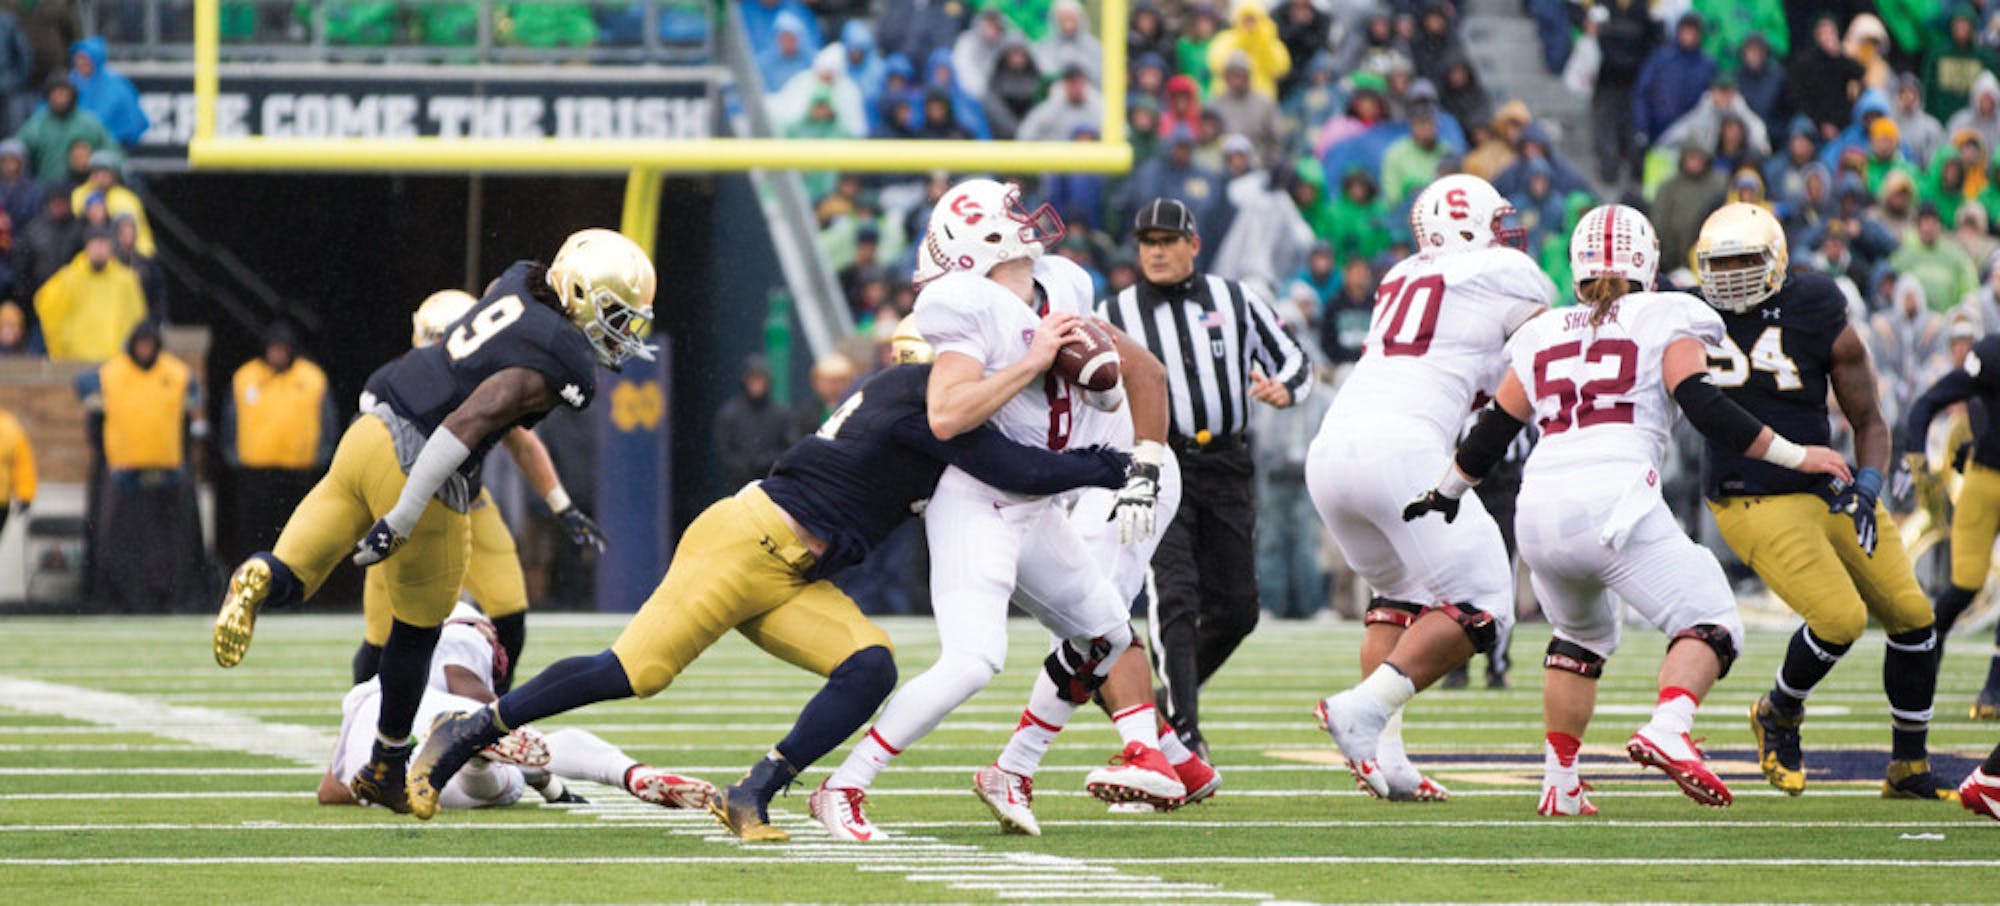 No 8 20141004, 2014-2015, 20141004, Football, Kevin Song, Notre Dame Stadium, Trumbetti, vs Stanford